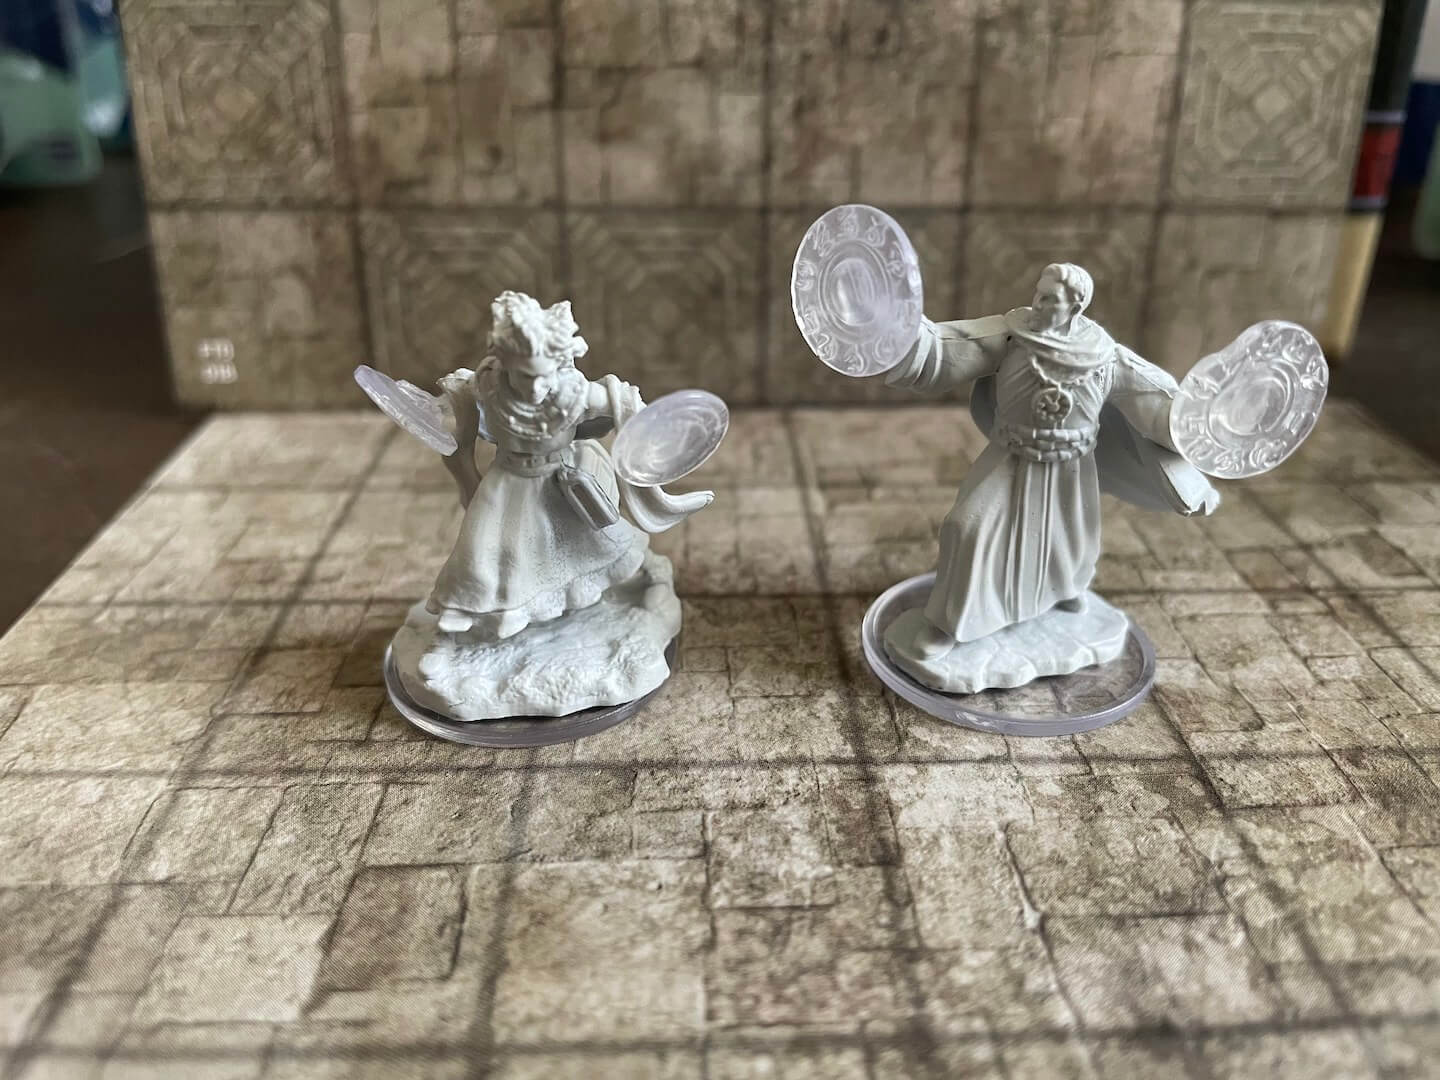  Wizkids Critical Role Miniatures Human Graviturgy and Chronurgy Wizards